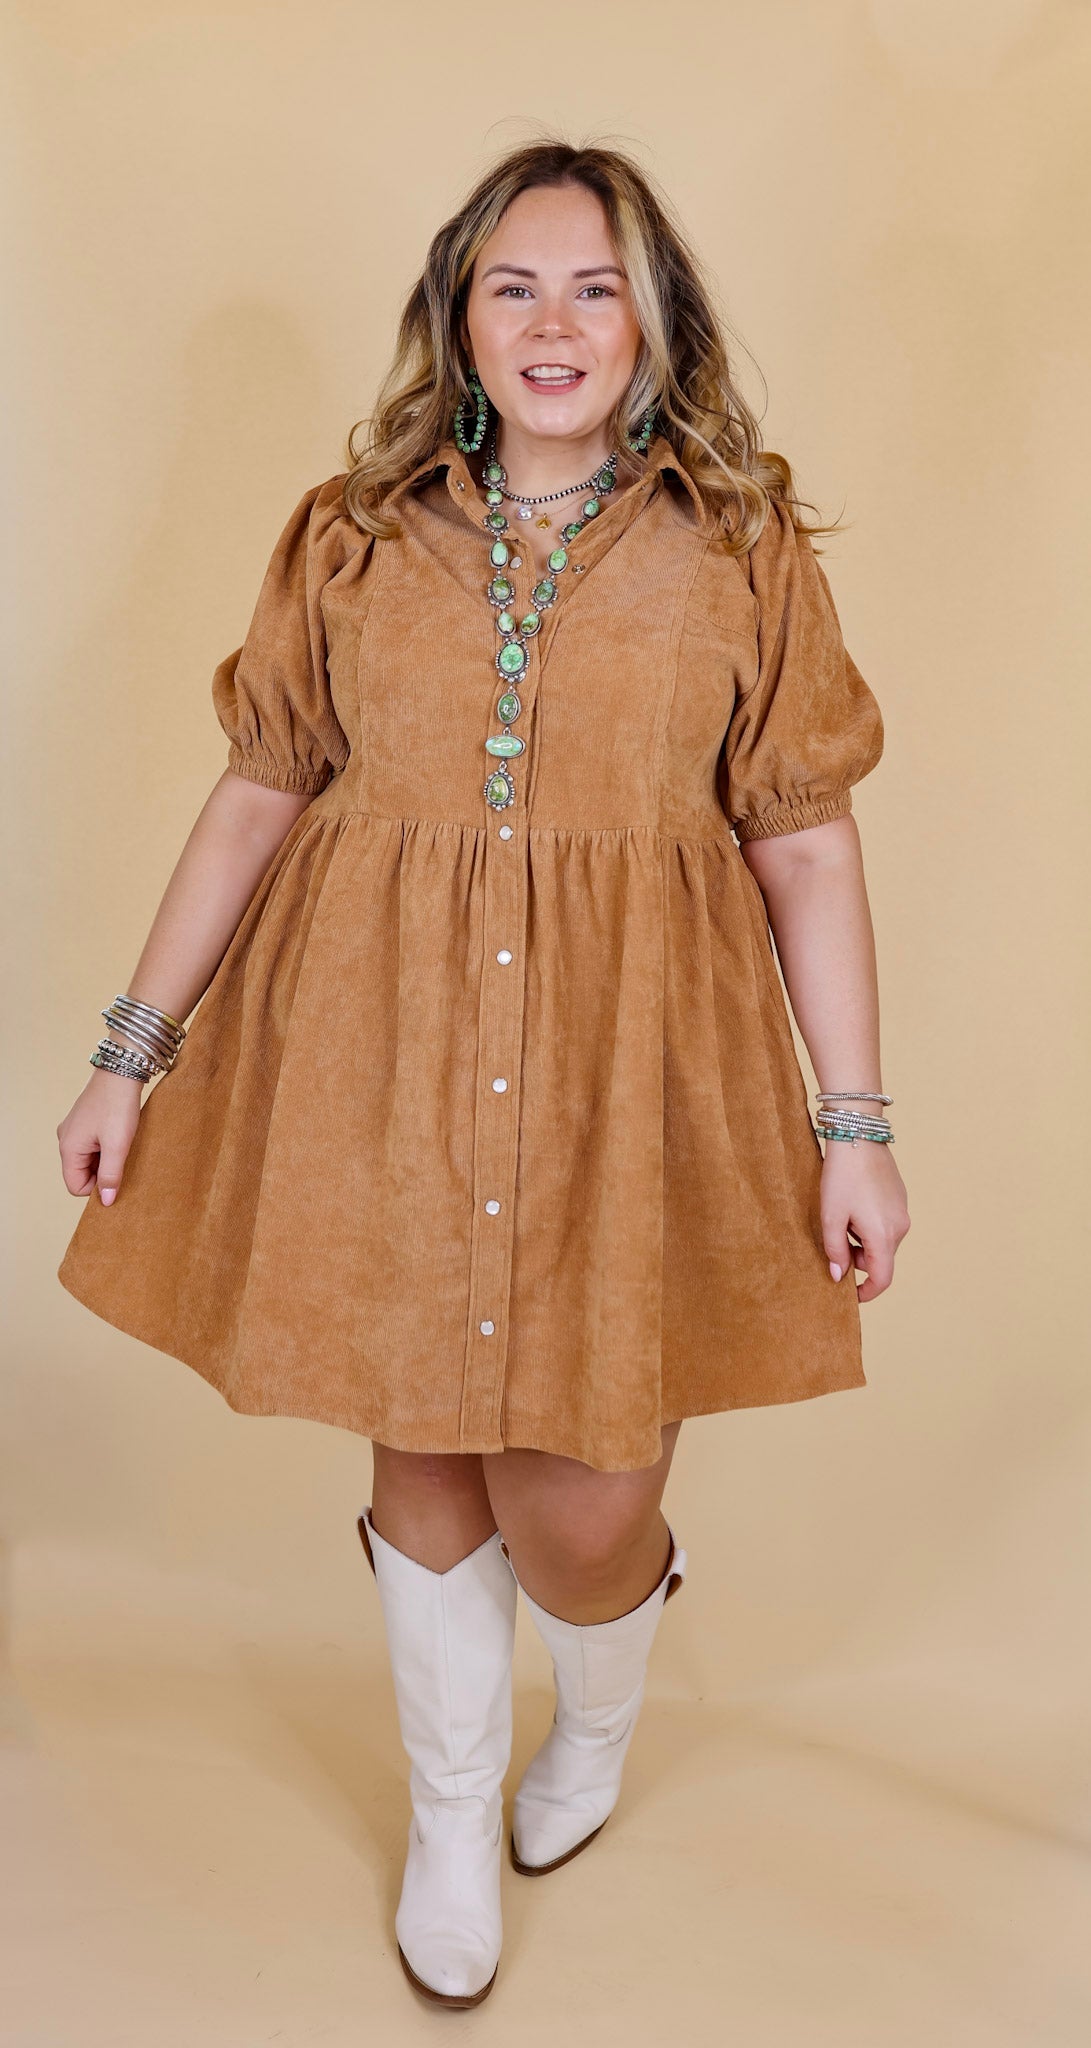 Adventures Ahead Button Up Corduroy Babydoll Dress in Camel Brown